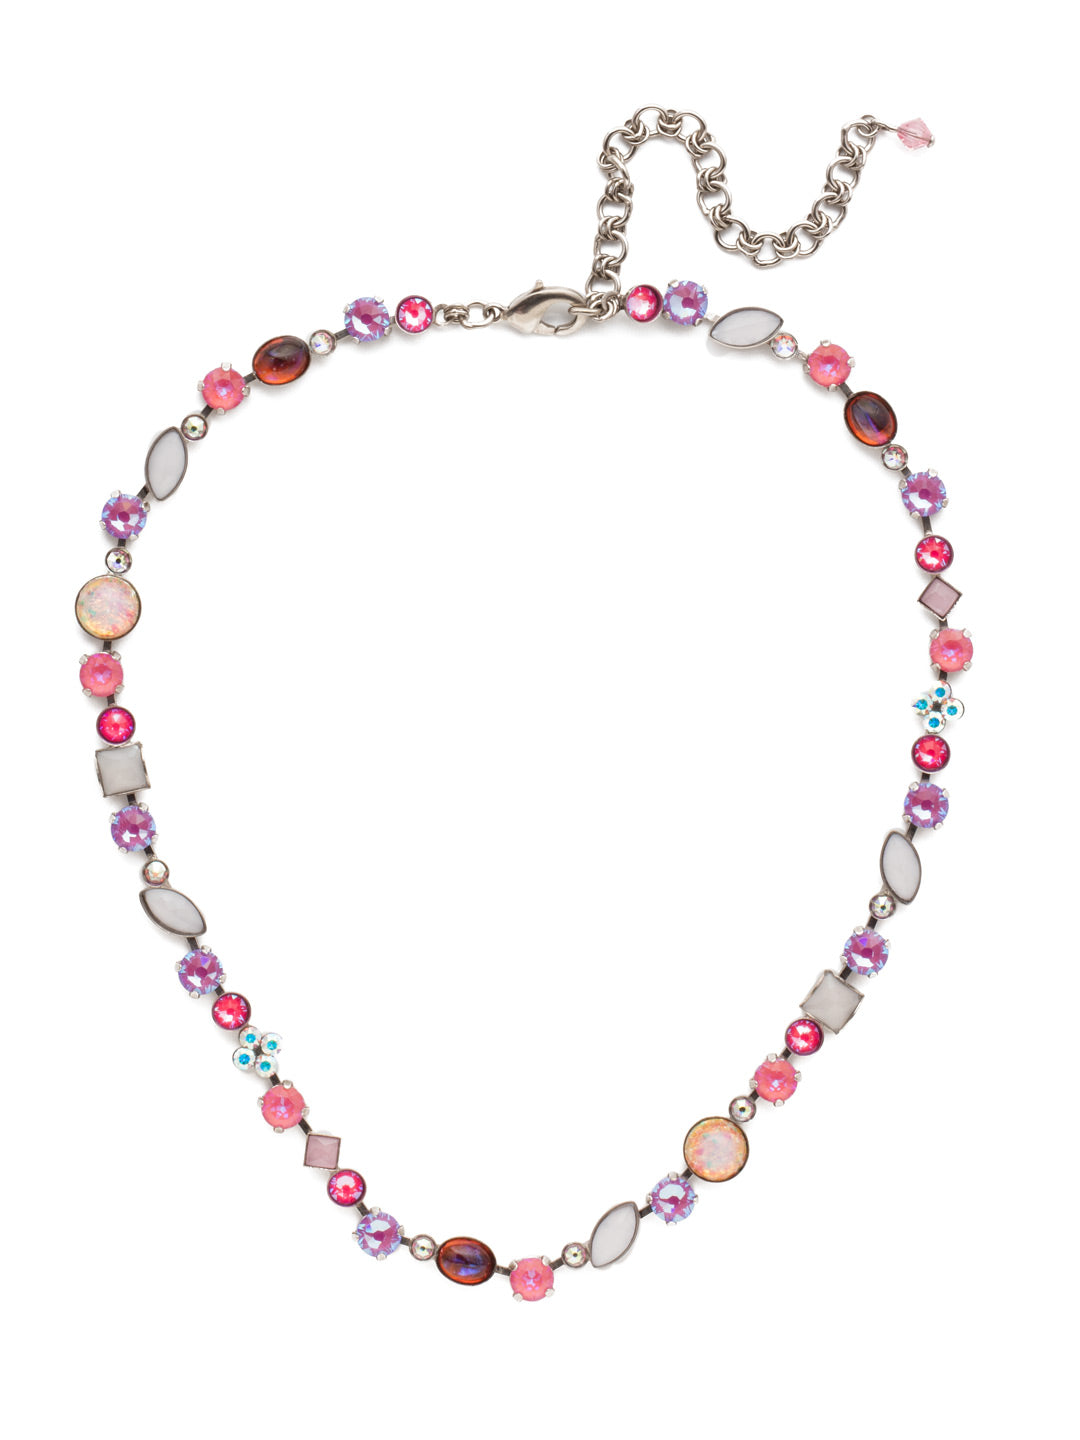 Classic Tee-Shirt Tennis Necklace - NAQ3ASETP - Can't find anything to pair with your favorite tee? Look no further! Our Classic Tee-Shirt Necklace features multi-cut crystal and cabochon stones to give you the perfect casual sparkle. From Sorrelli's Electric Pink collection in our Antique Silver-tone finish.